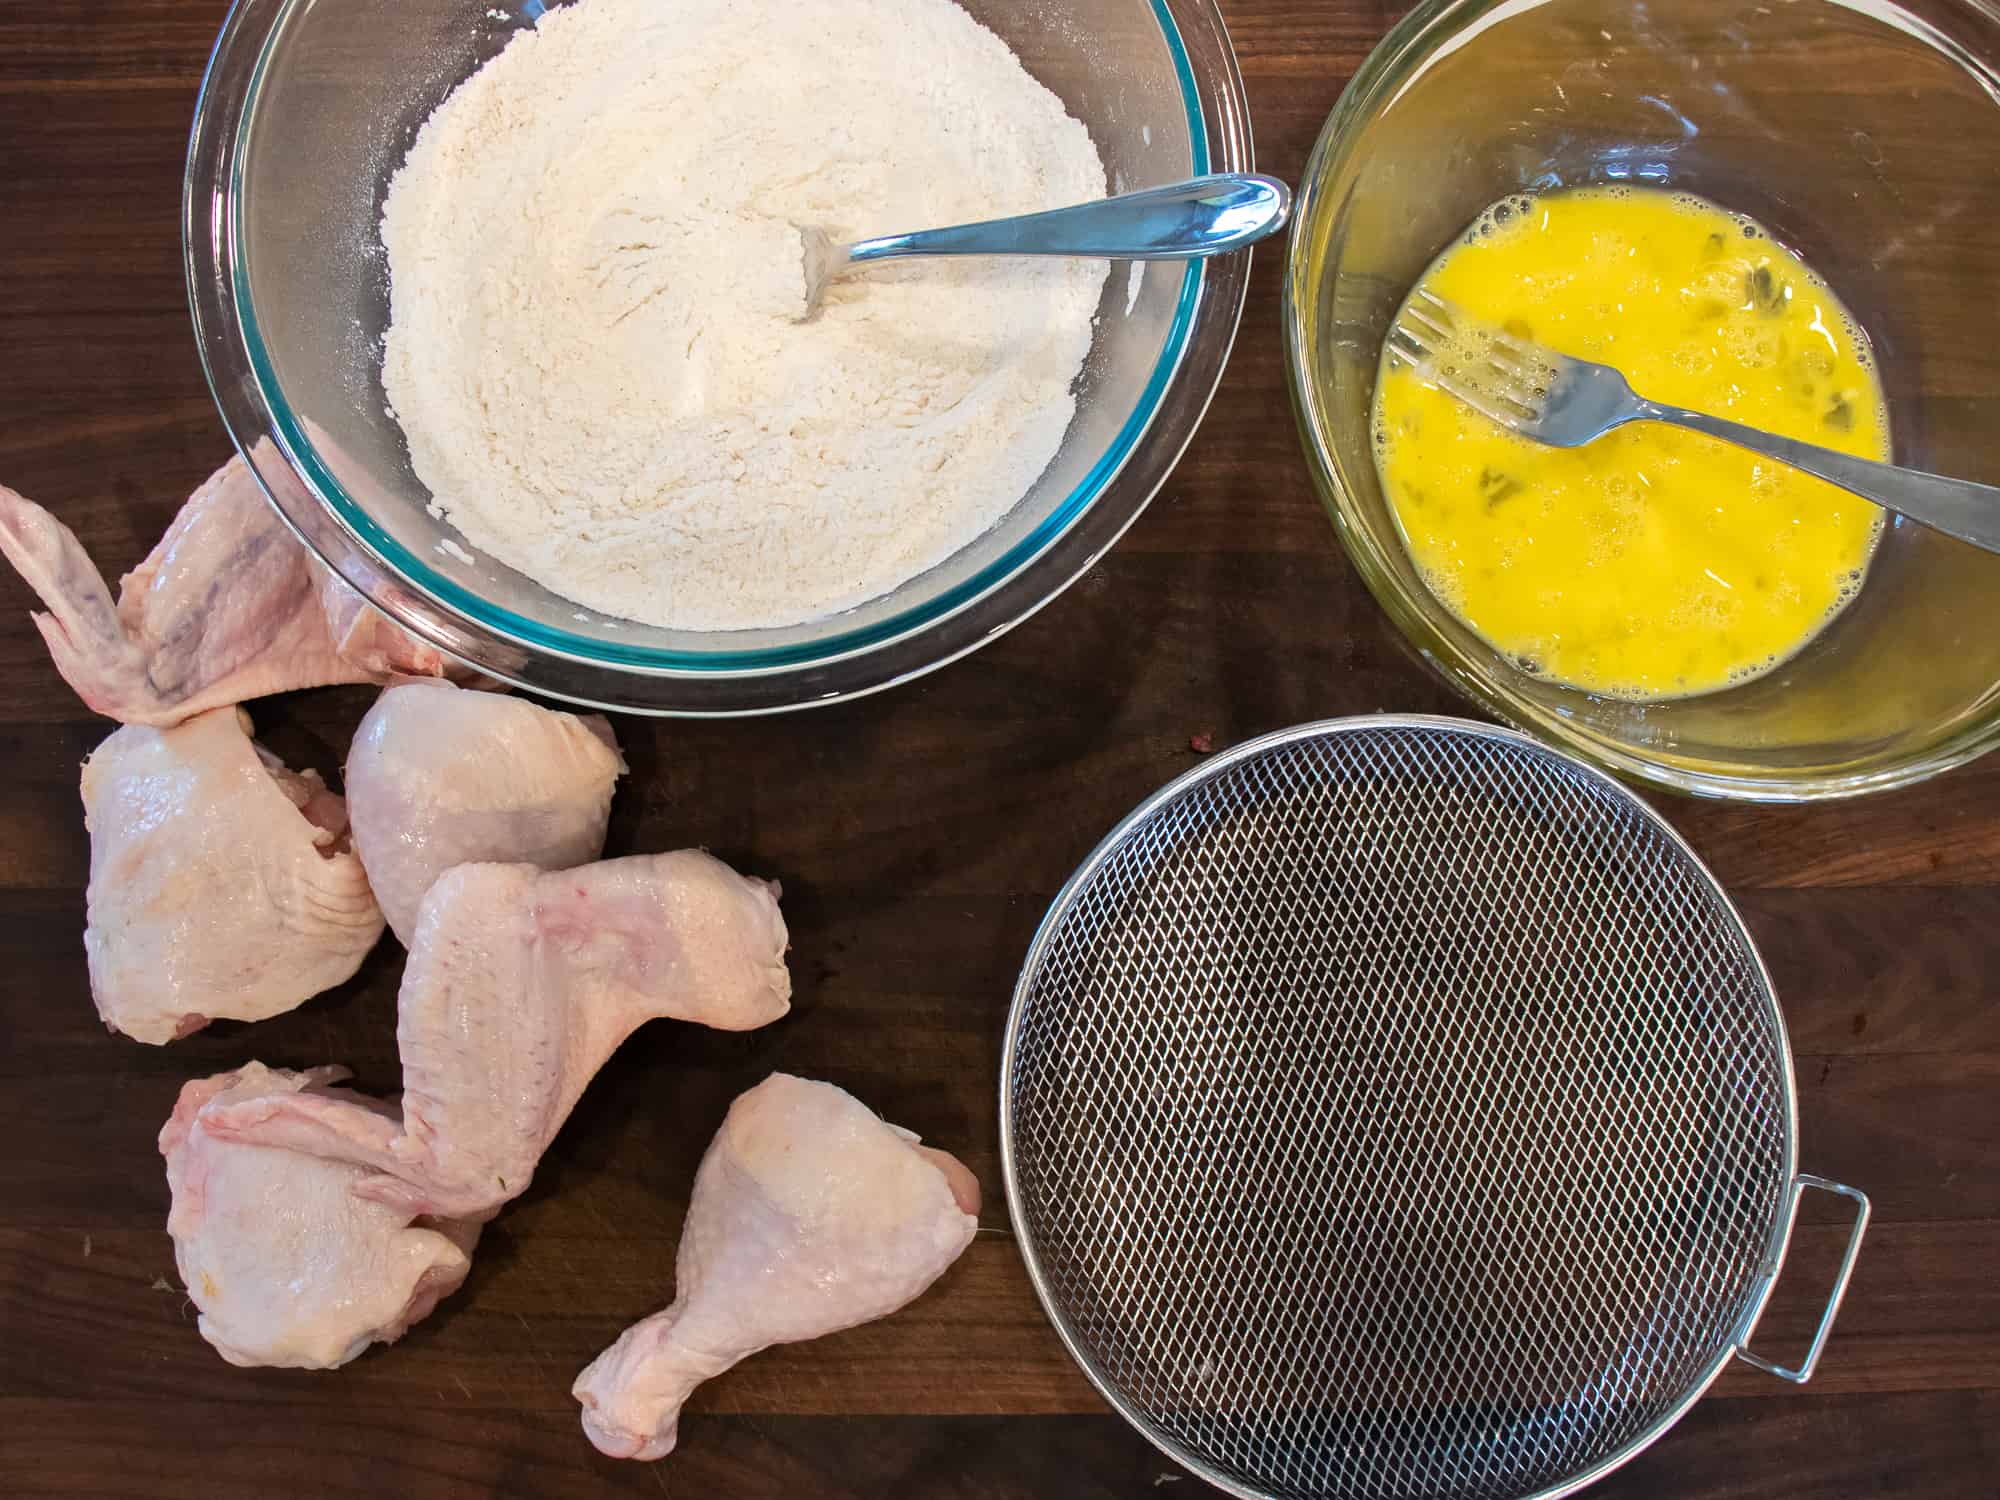 Cut up a whole chicken and dredge in flour and dip in an egg wash.